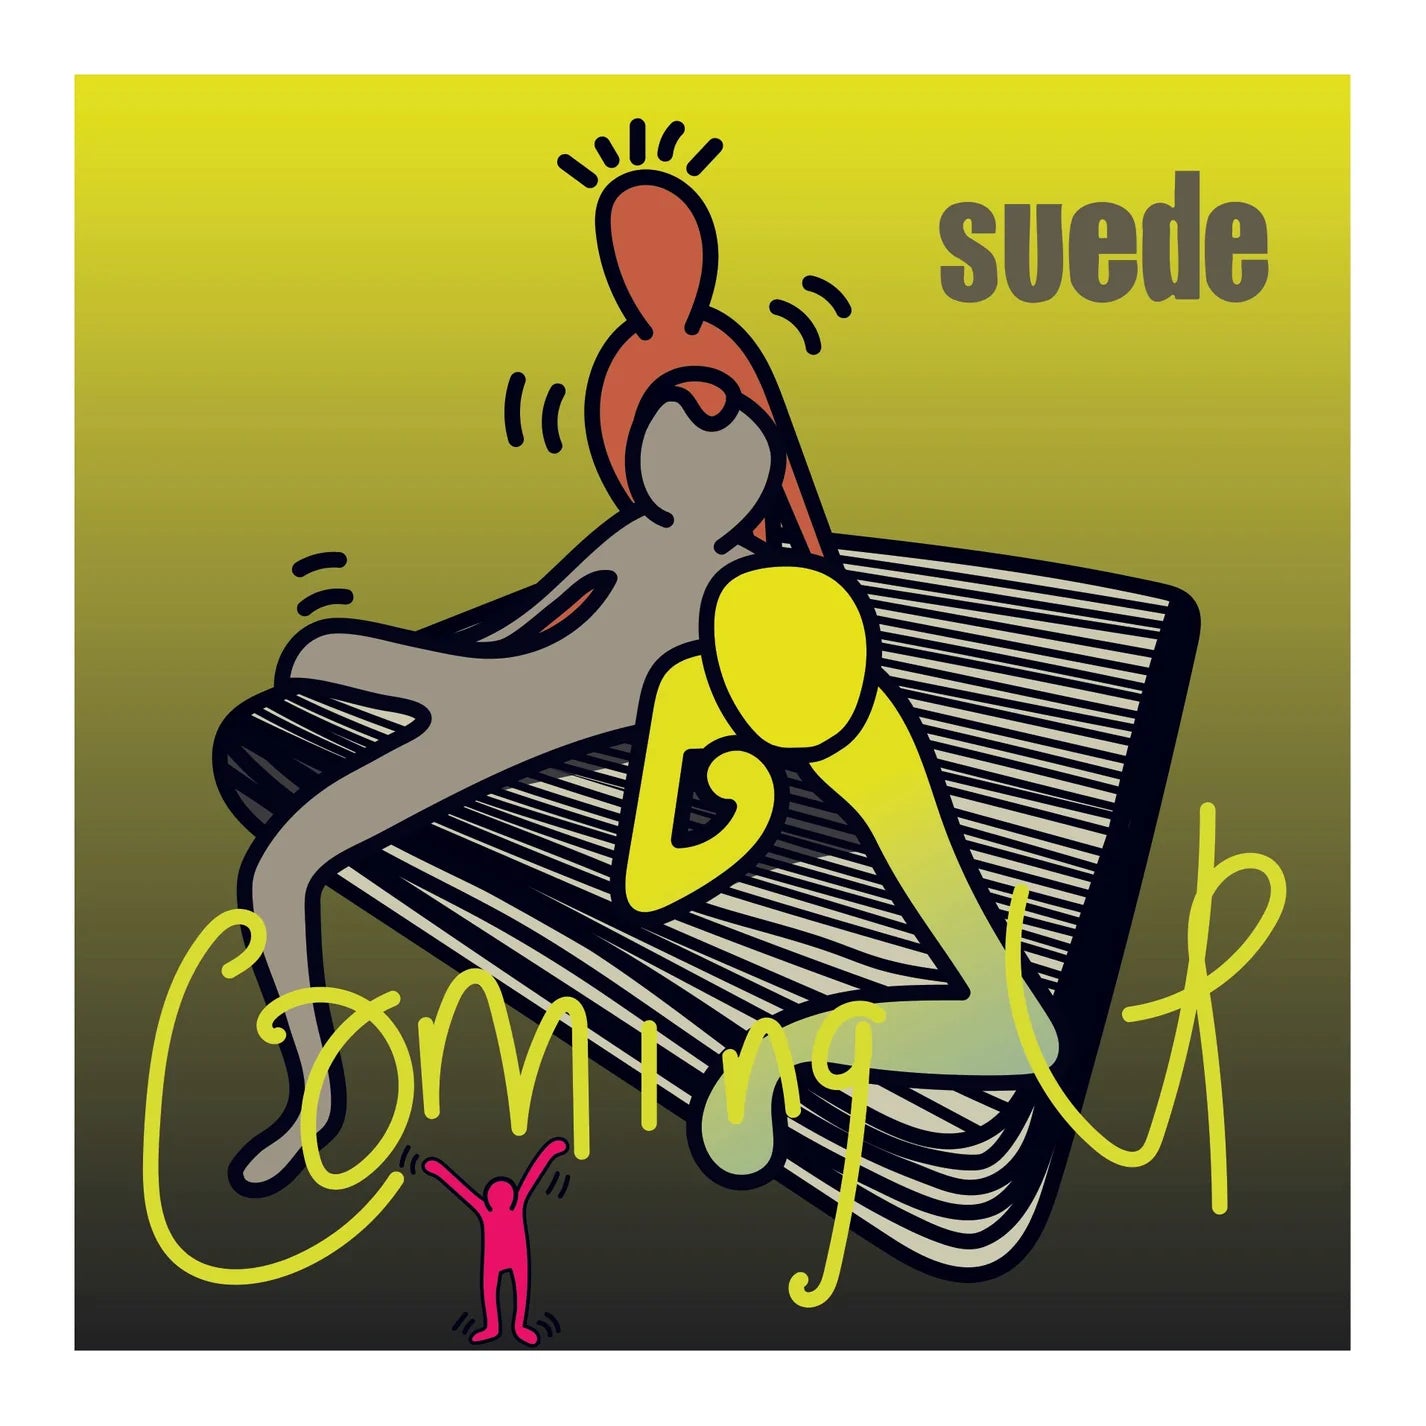 Suede - Coming Up Album Cover by TBOY